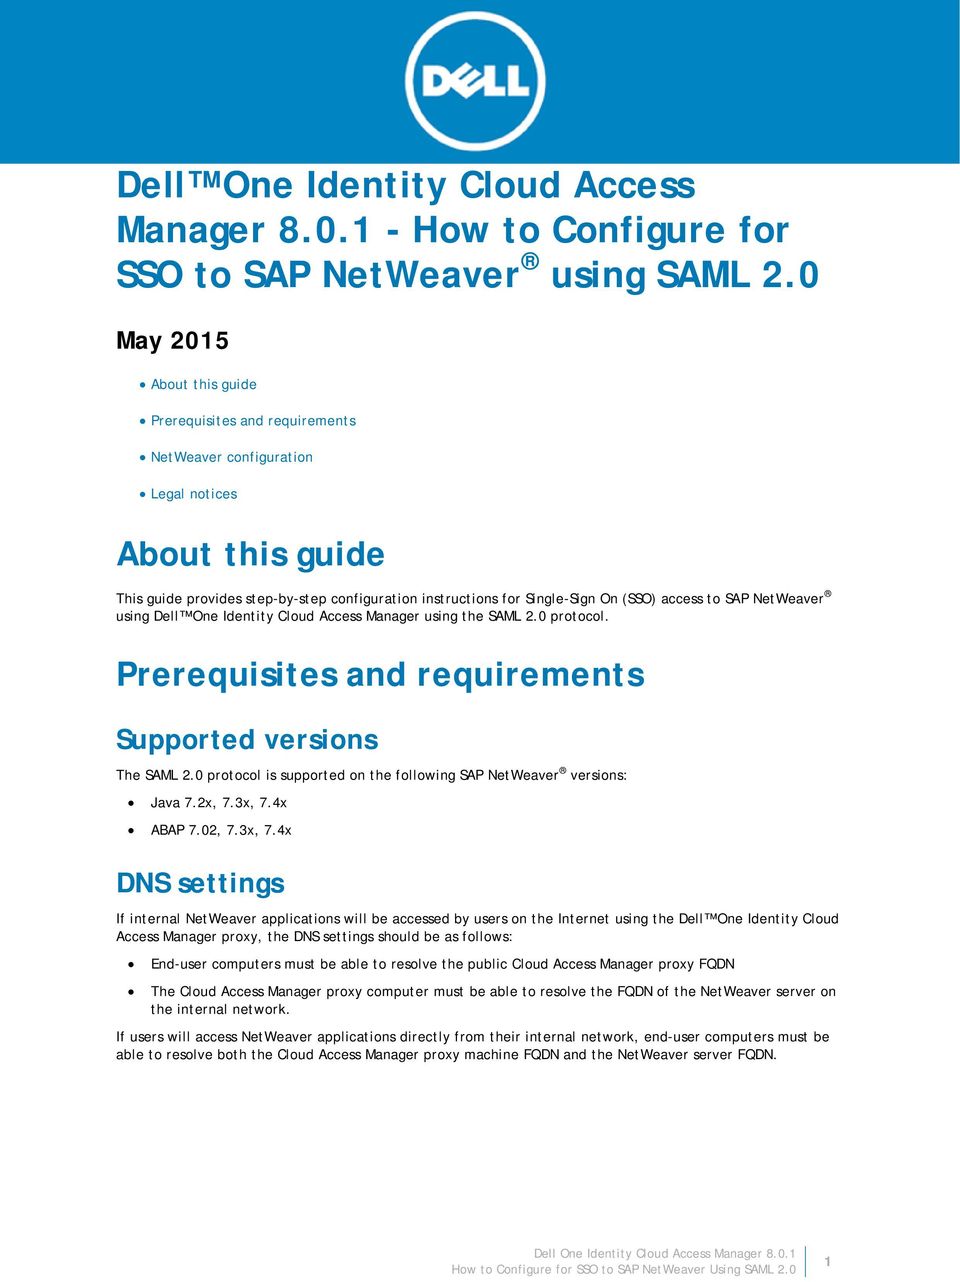 access to SAP NetWeaver using Dell One Identity Cloud Access Manager using the SAML 2.0 protocol. Prerequisites and requirements Supported versions The SAML 2.